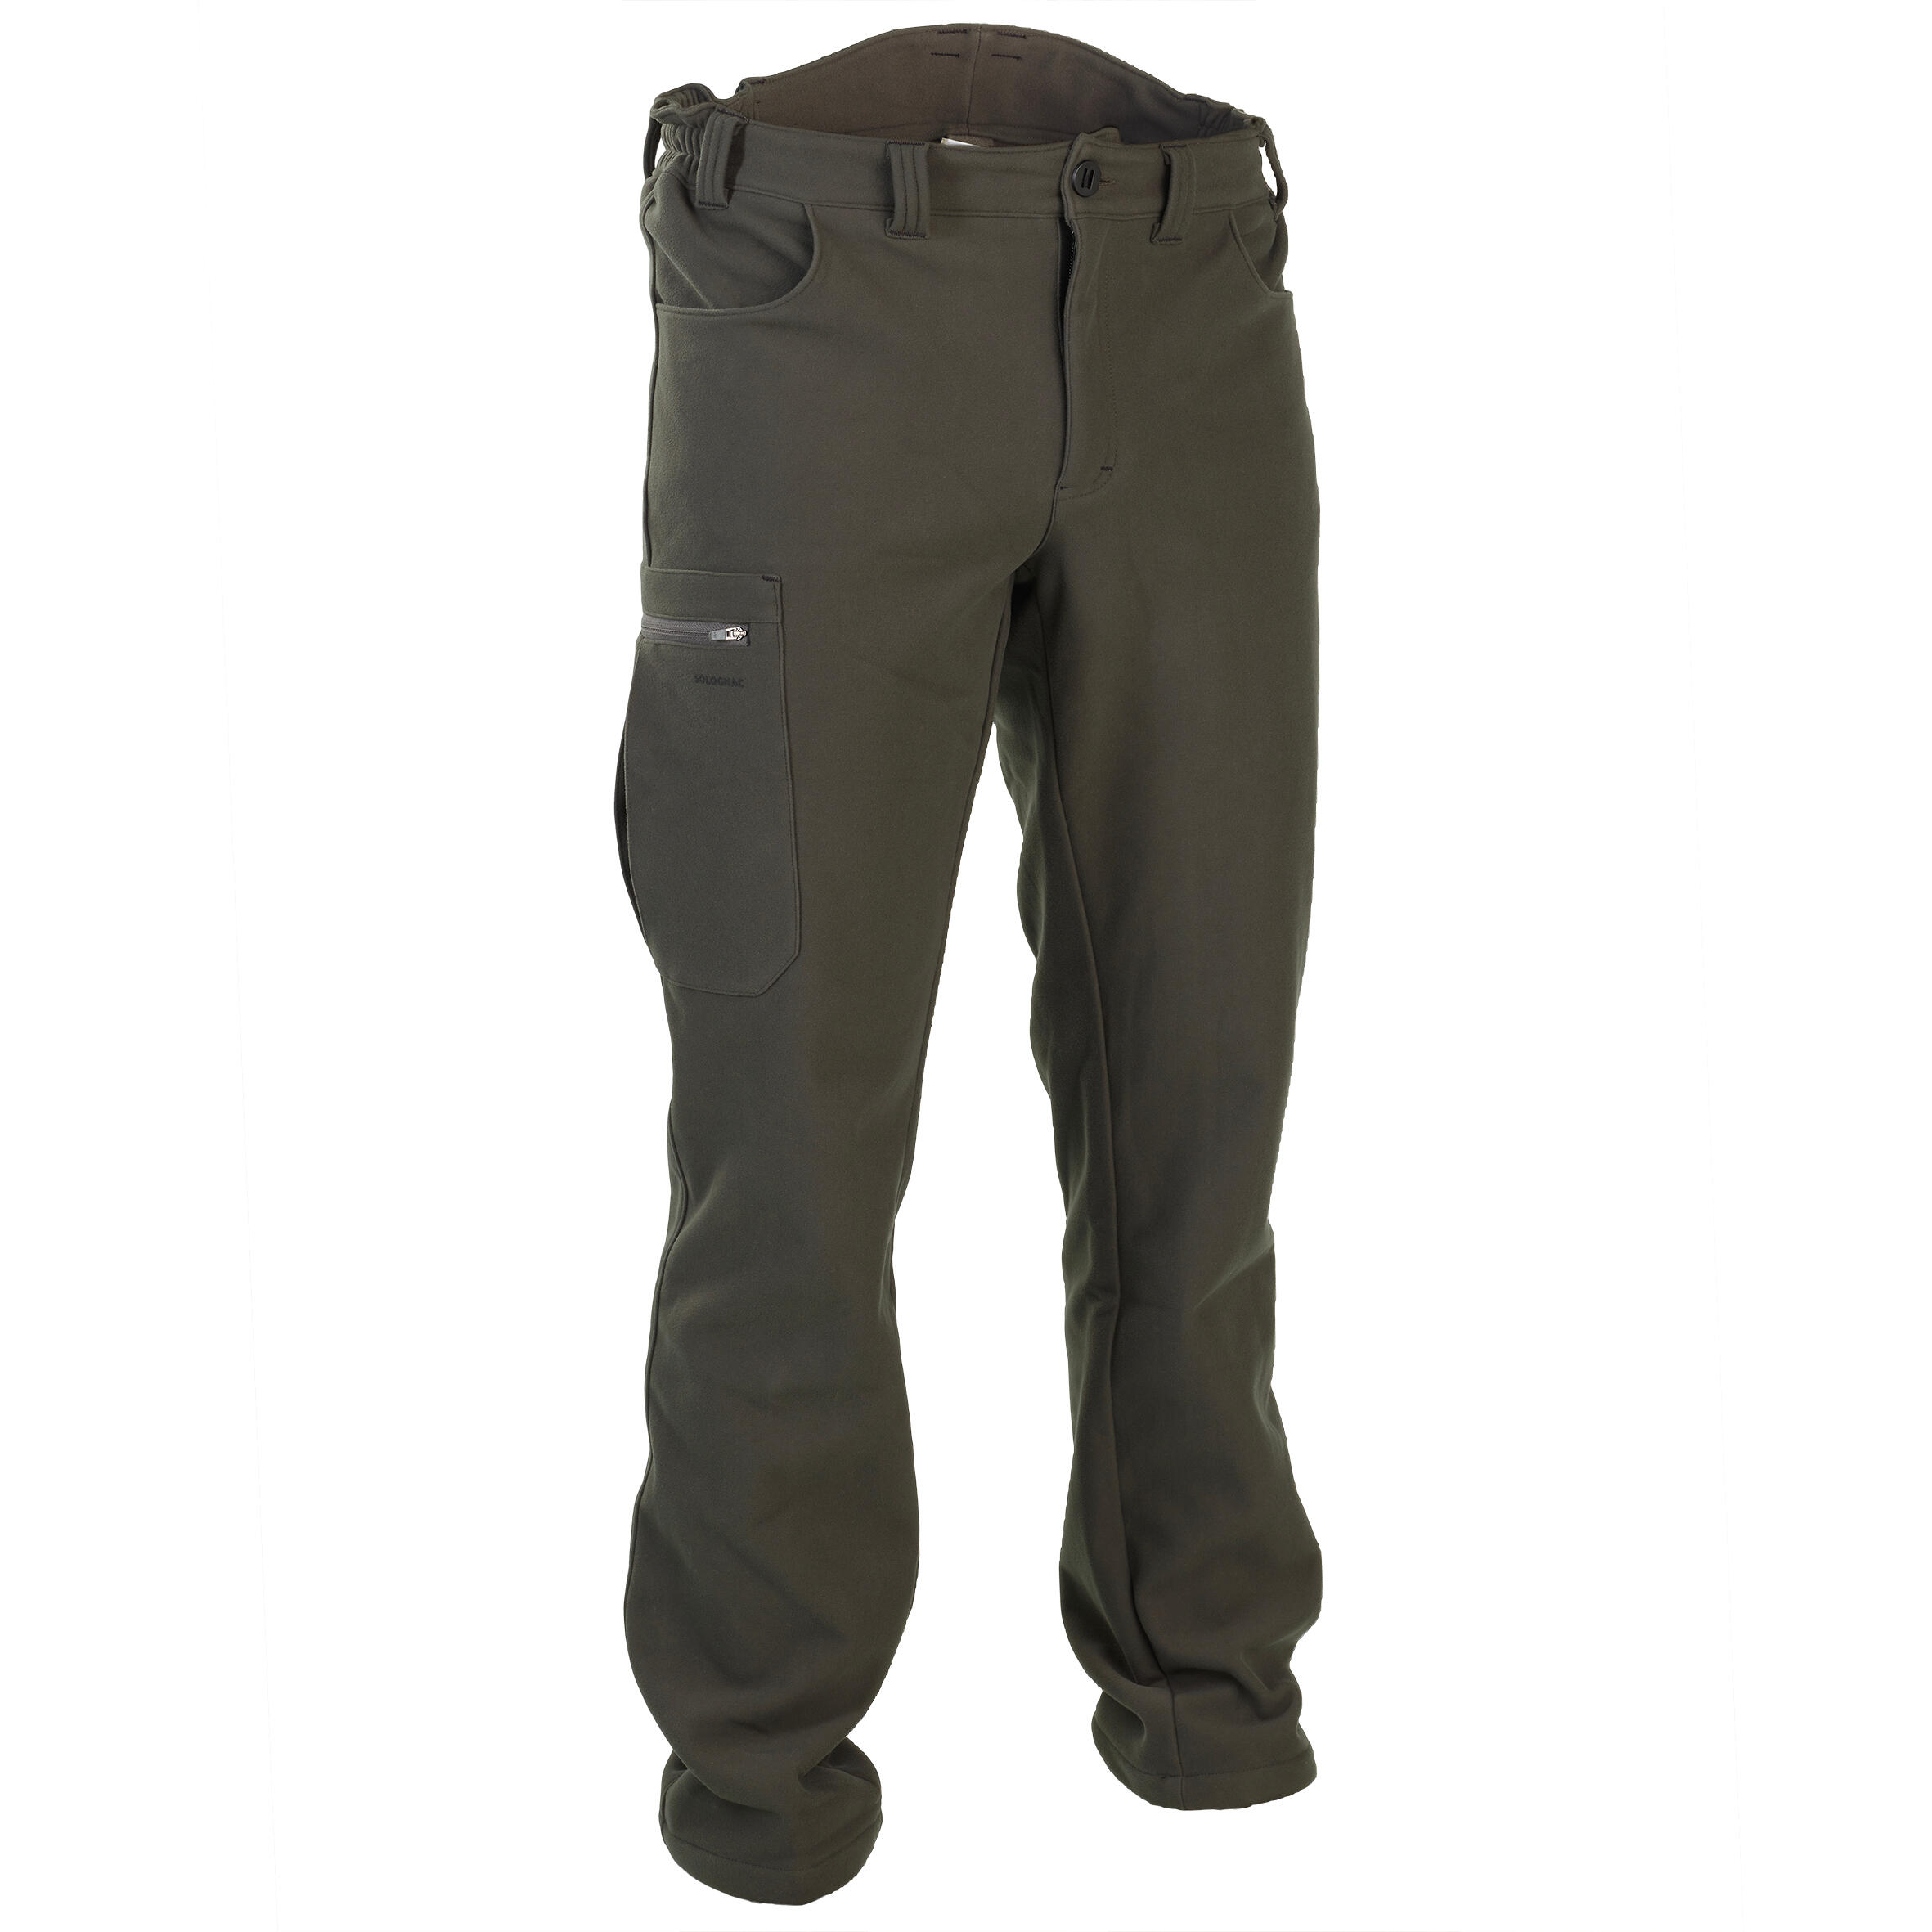 Wed'ze by Decathlon Pull'nfit very warm breathable Summit/Snow Pants  Features and Properties: ❄️ Waterproof and windproof ❄️Inbui... | Instagram